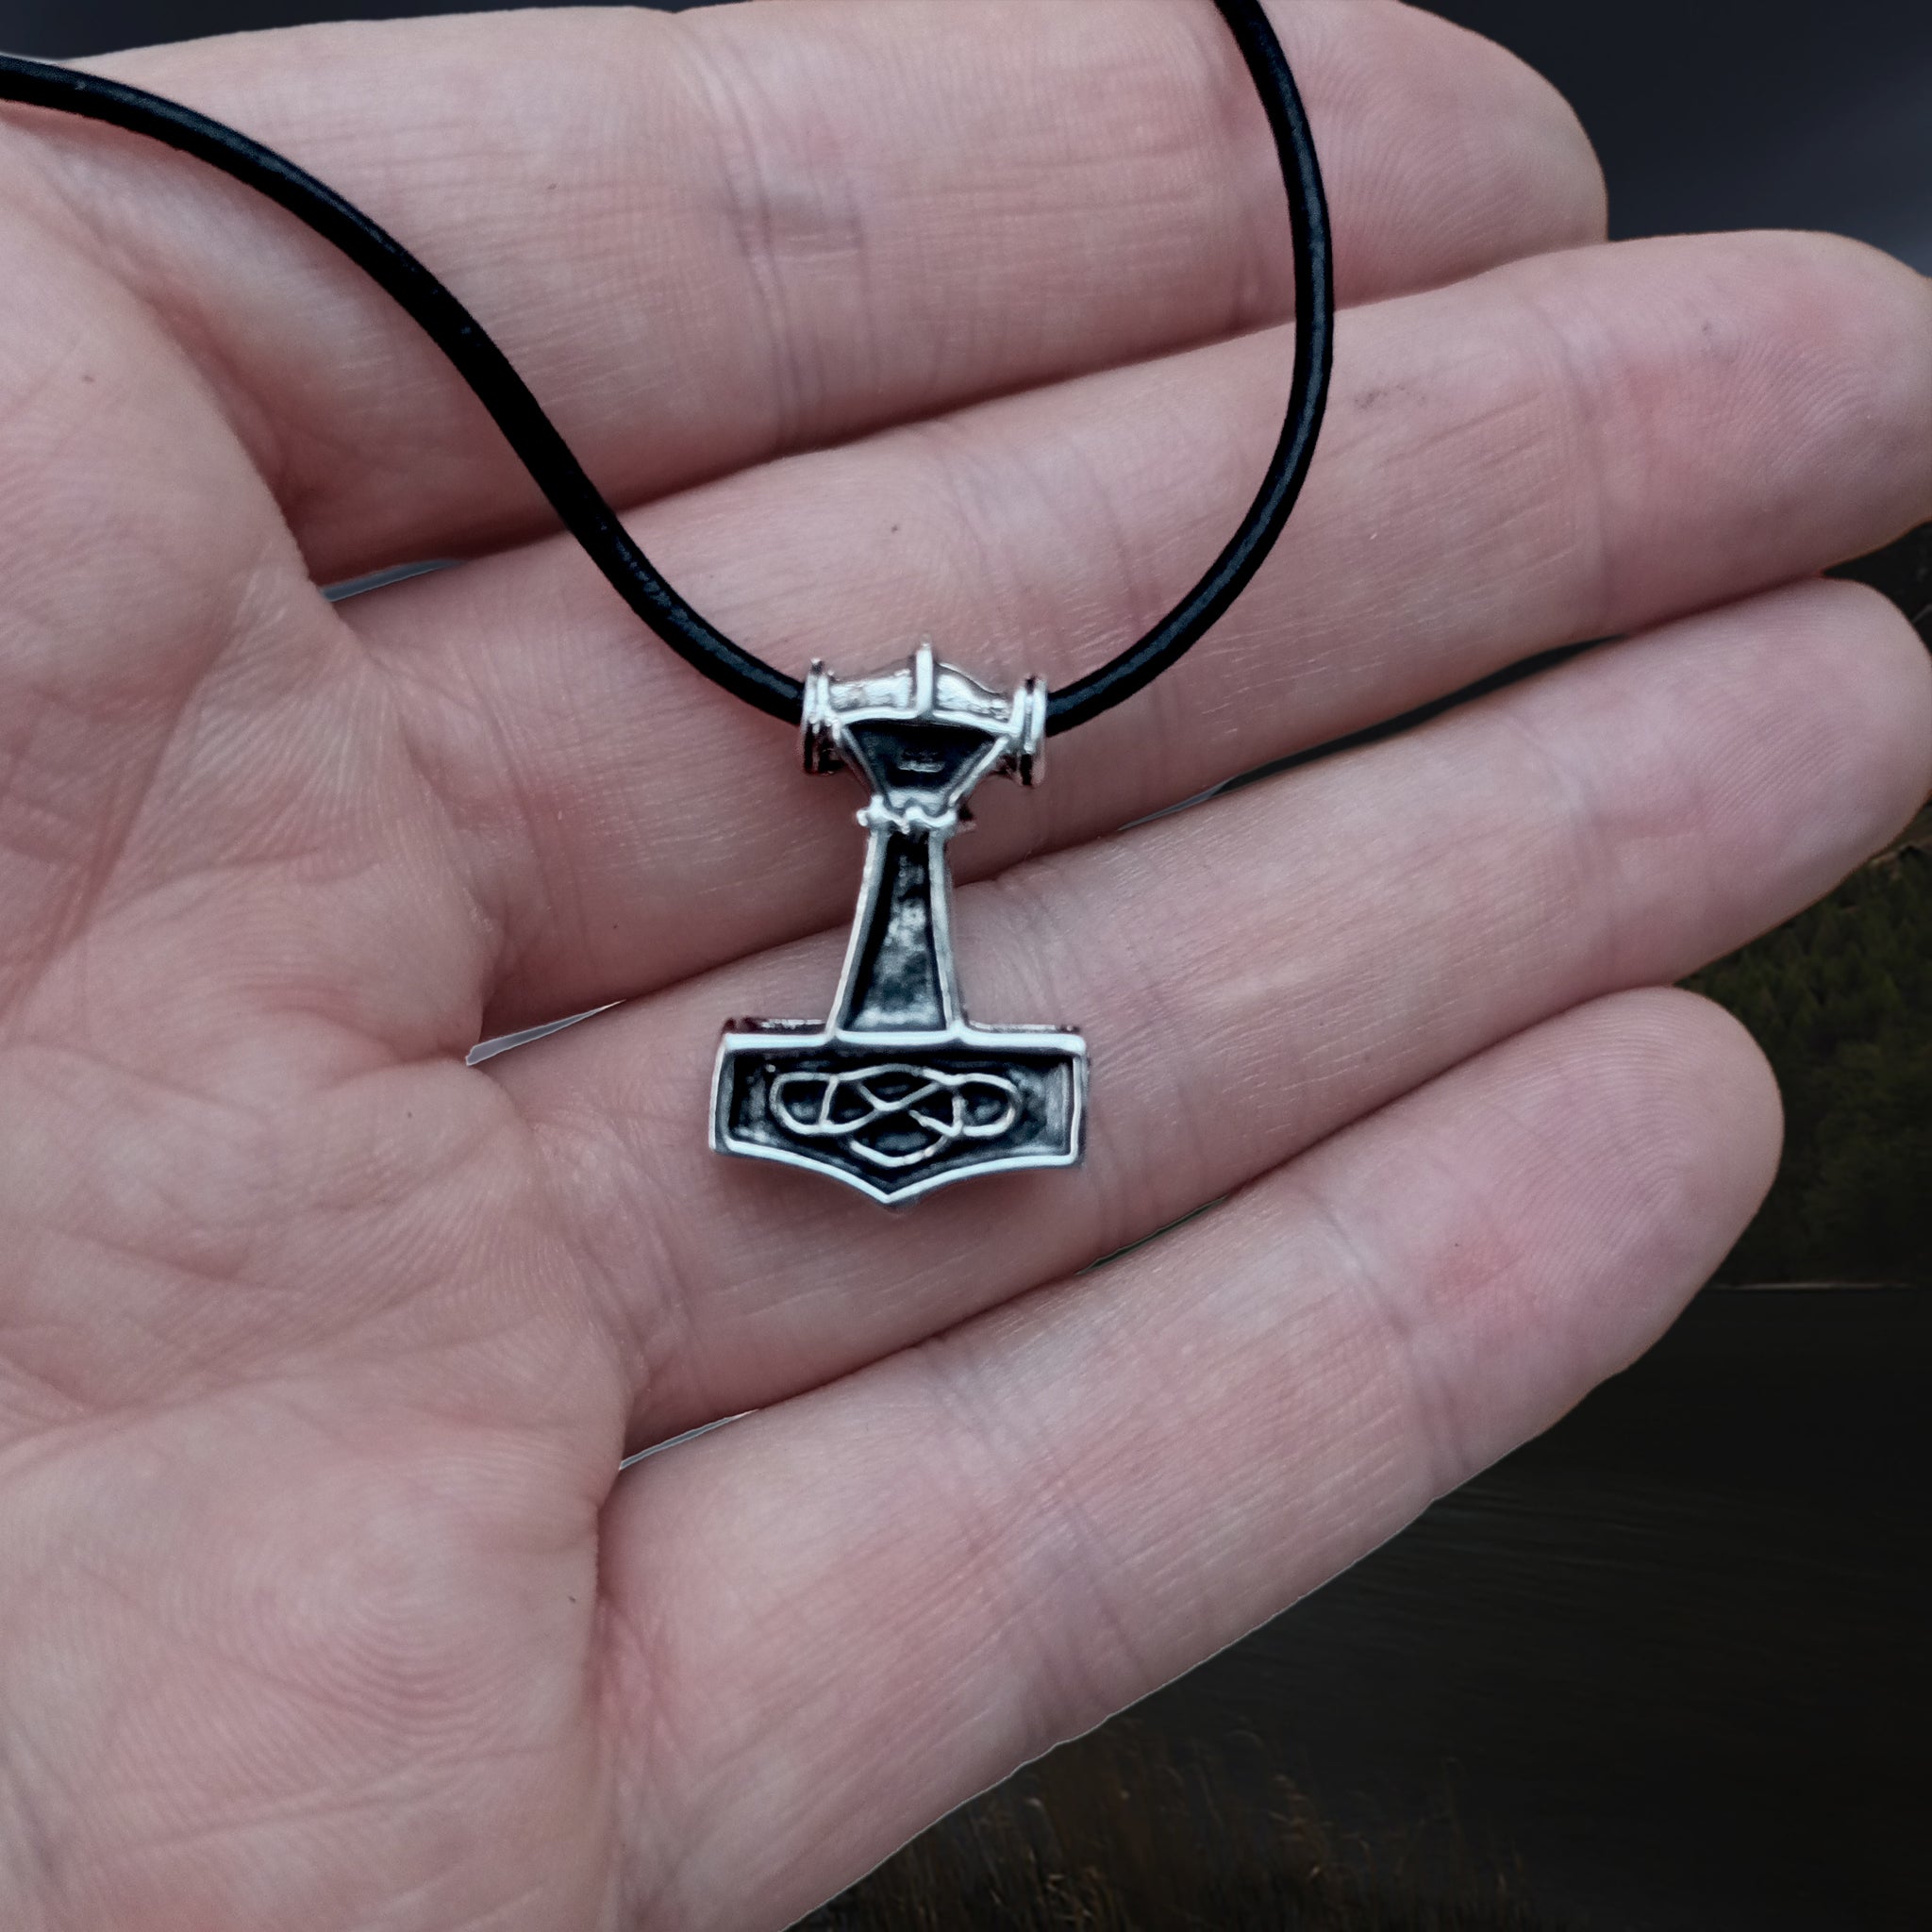 Small Silver Thunder Thors Hammer Viking Pendant on Leather Thong on Hand - Back View